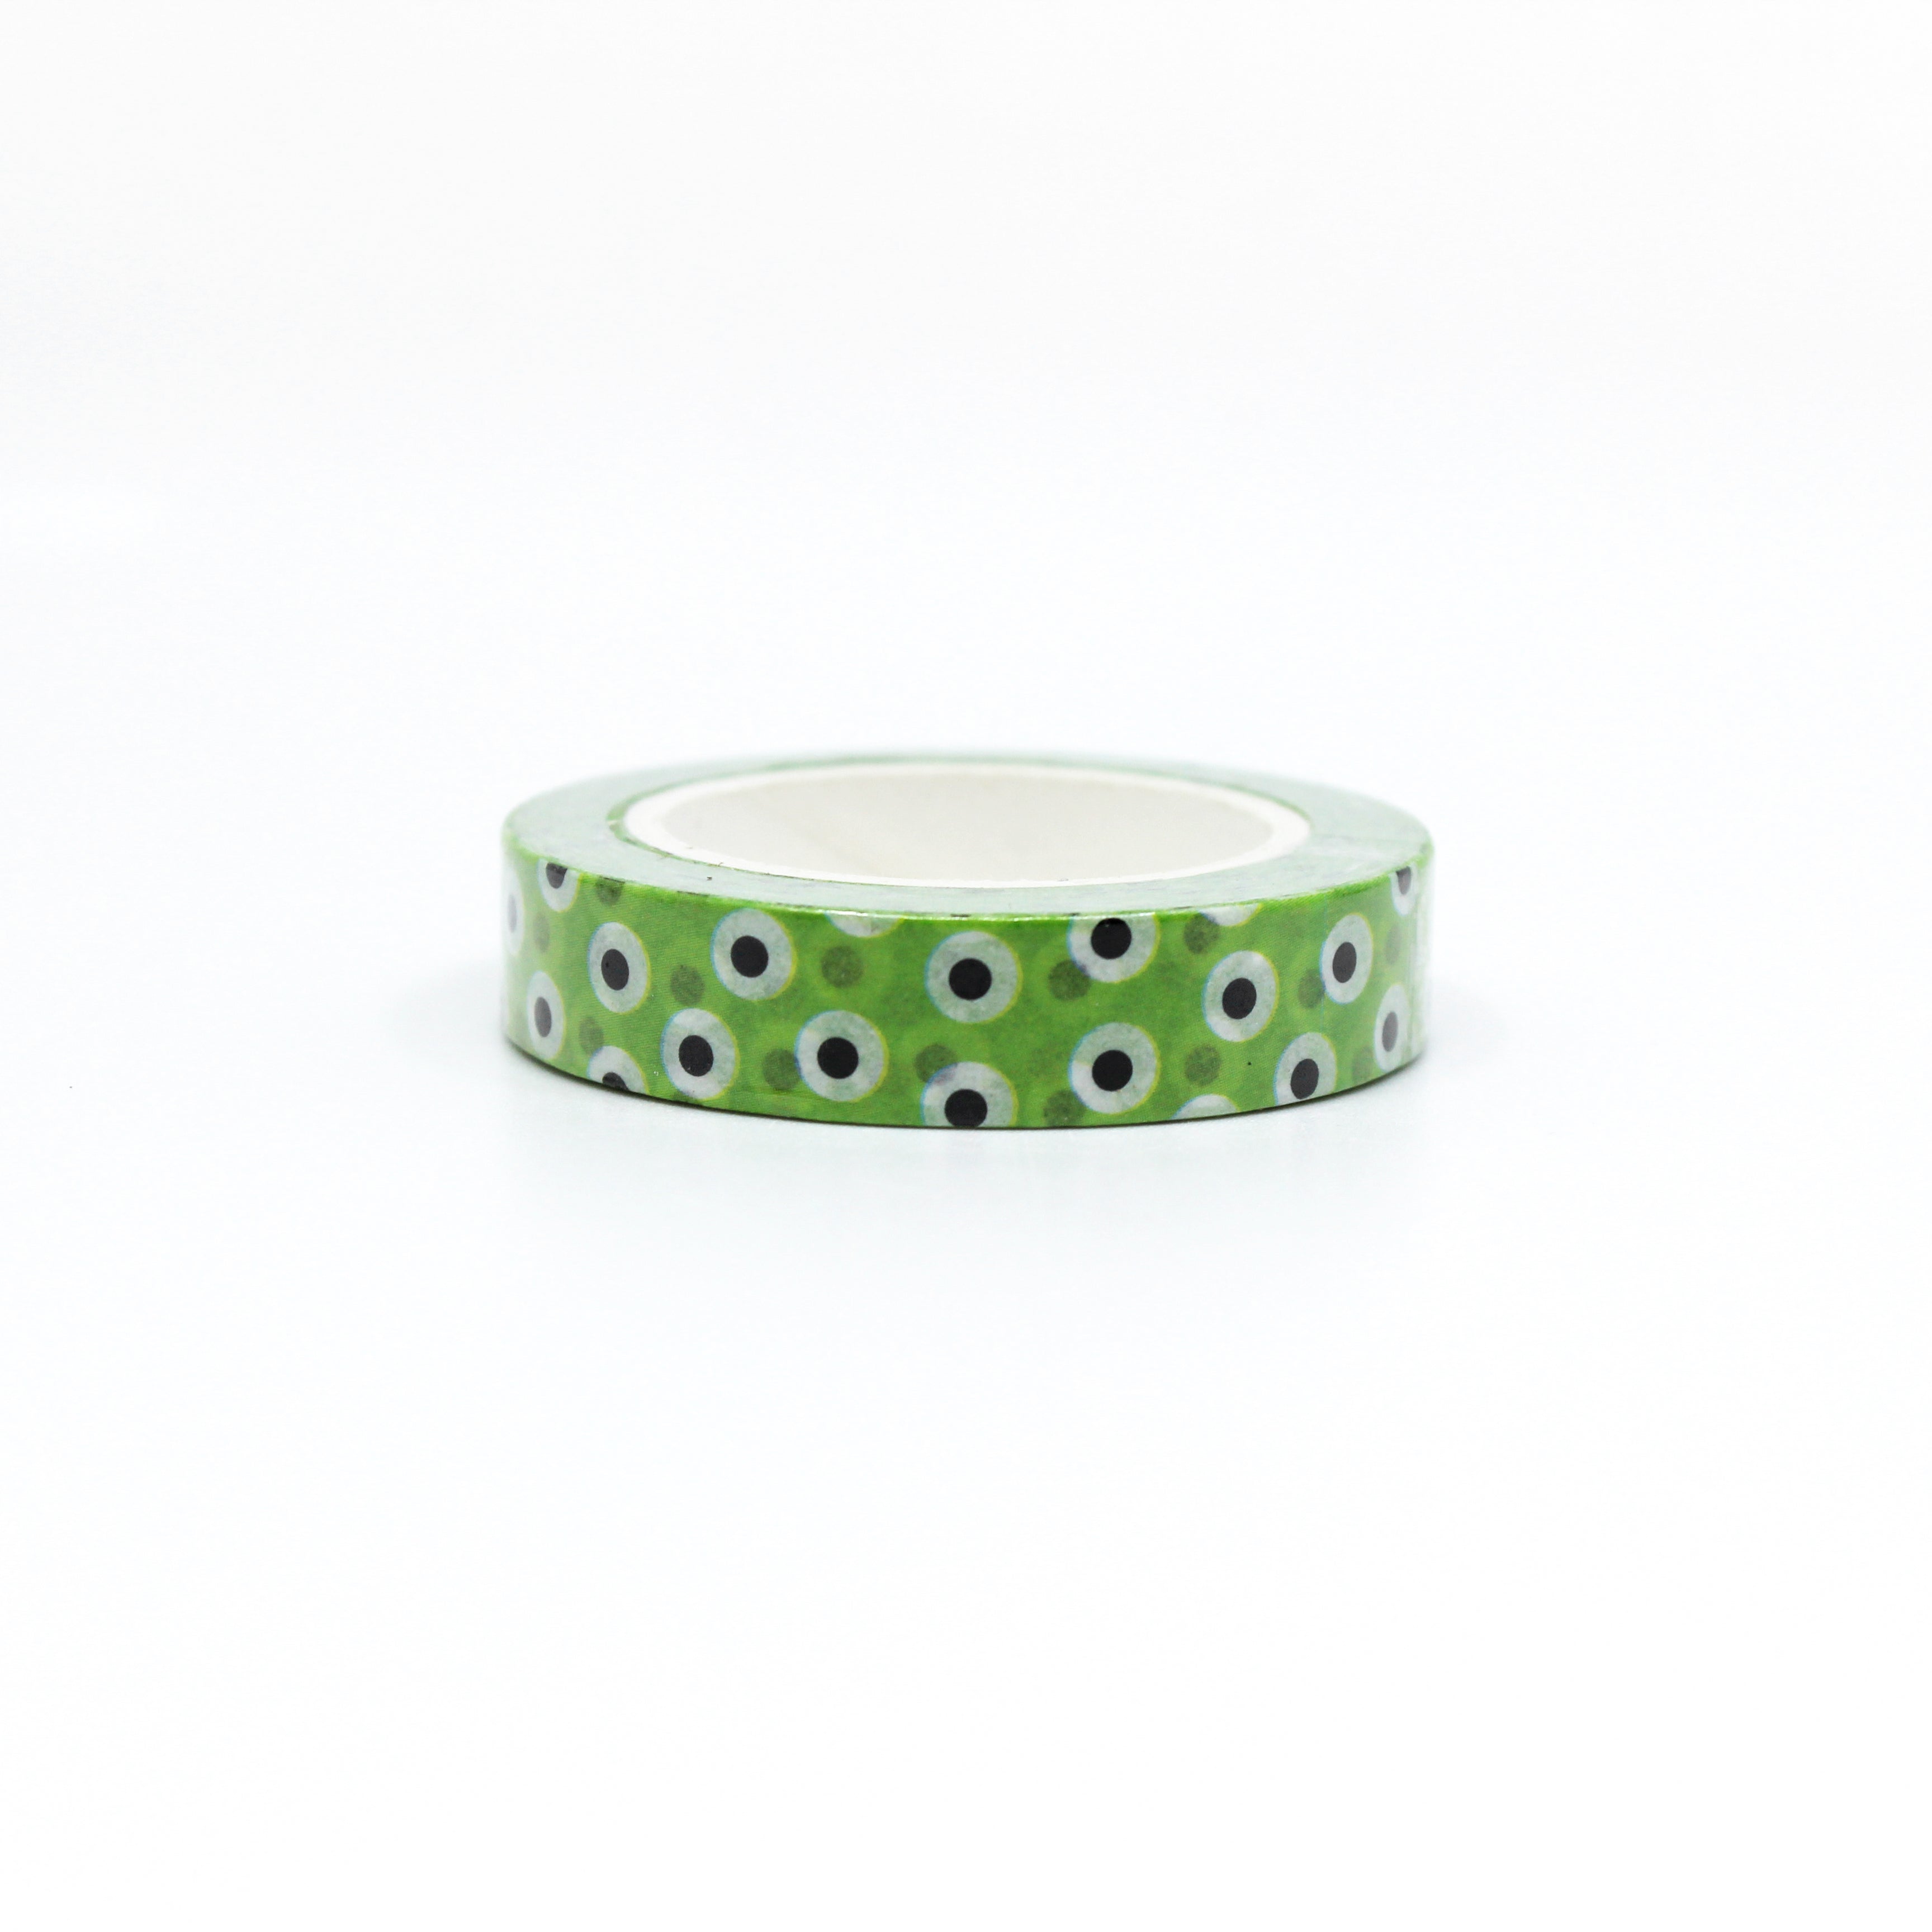 This is a monster green eyes washi tape from BBB Supplies Craft Shop